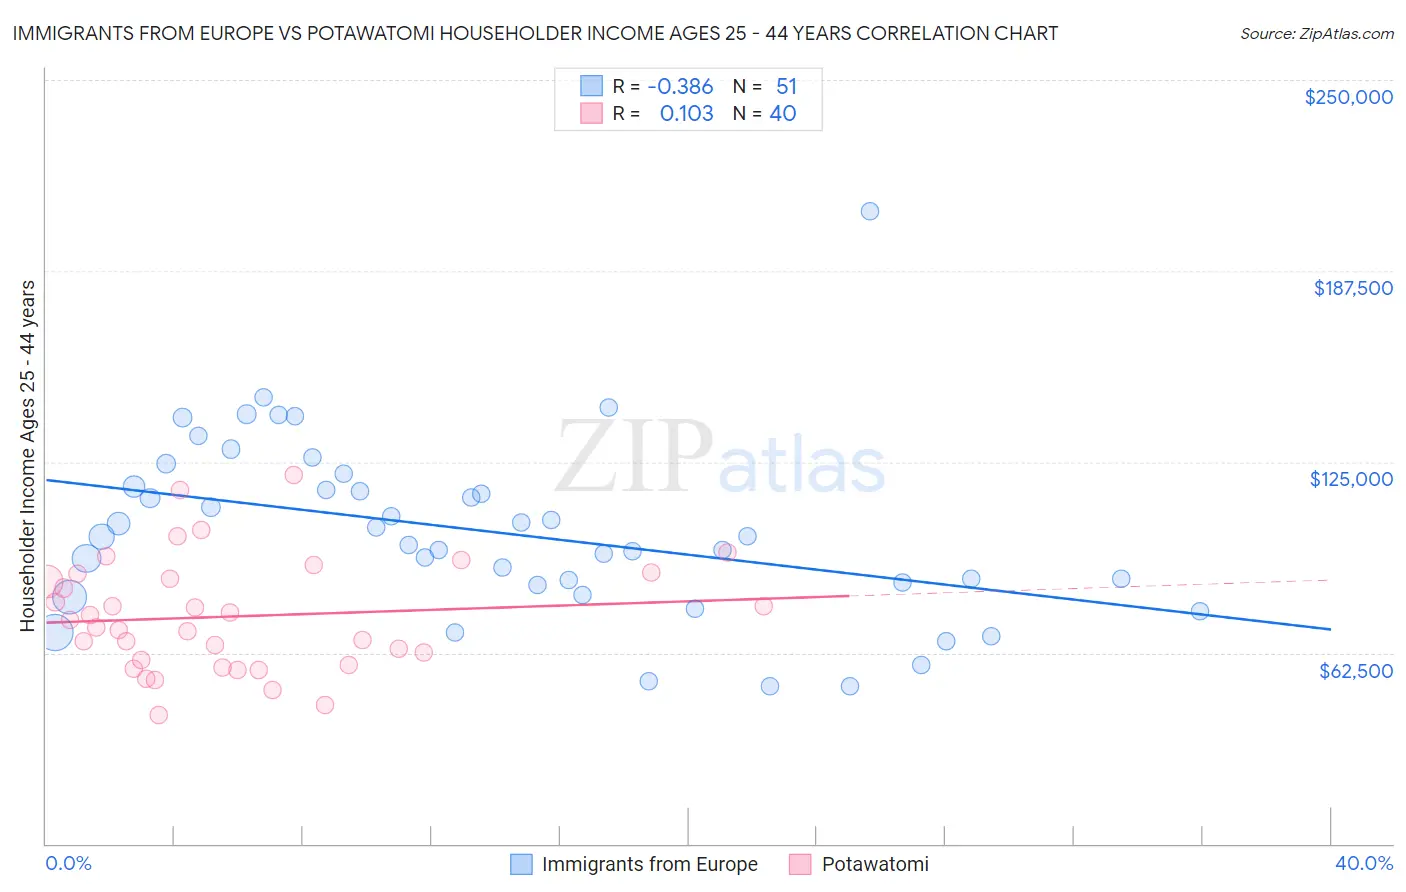 Immigrants from Europe vs Potawatomi Householder Income Ages 25 - 44 years